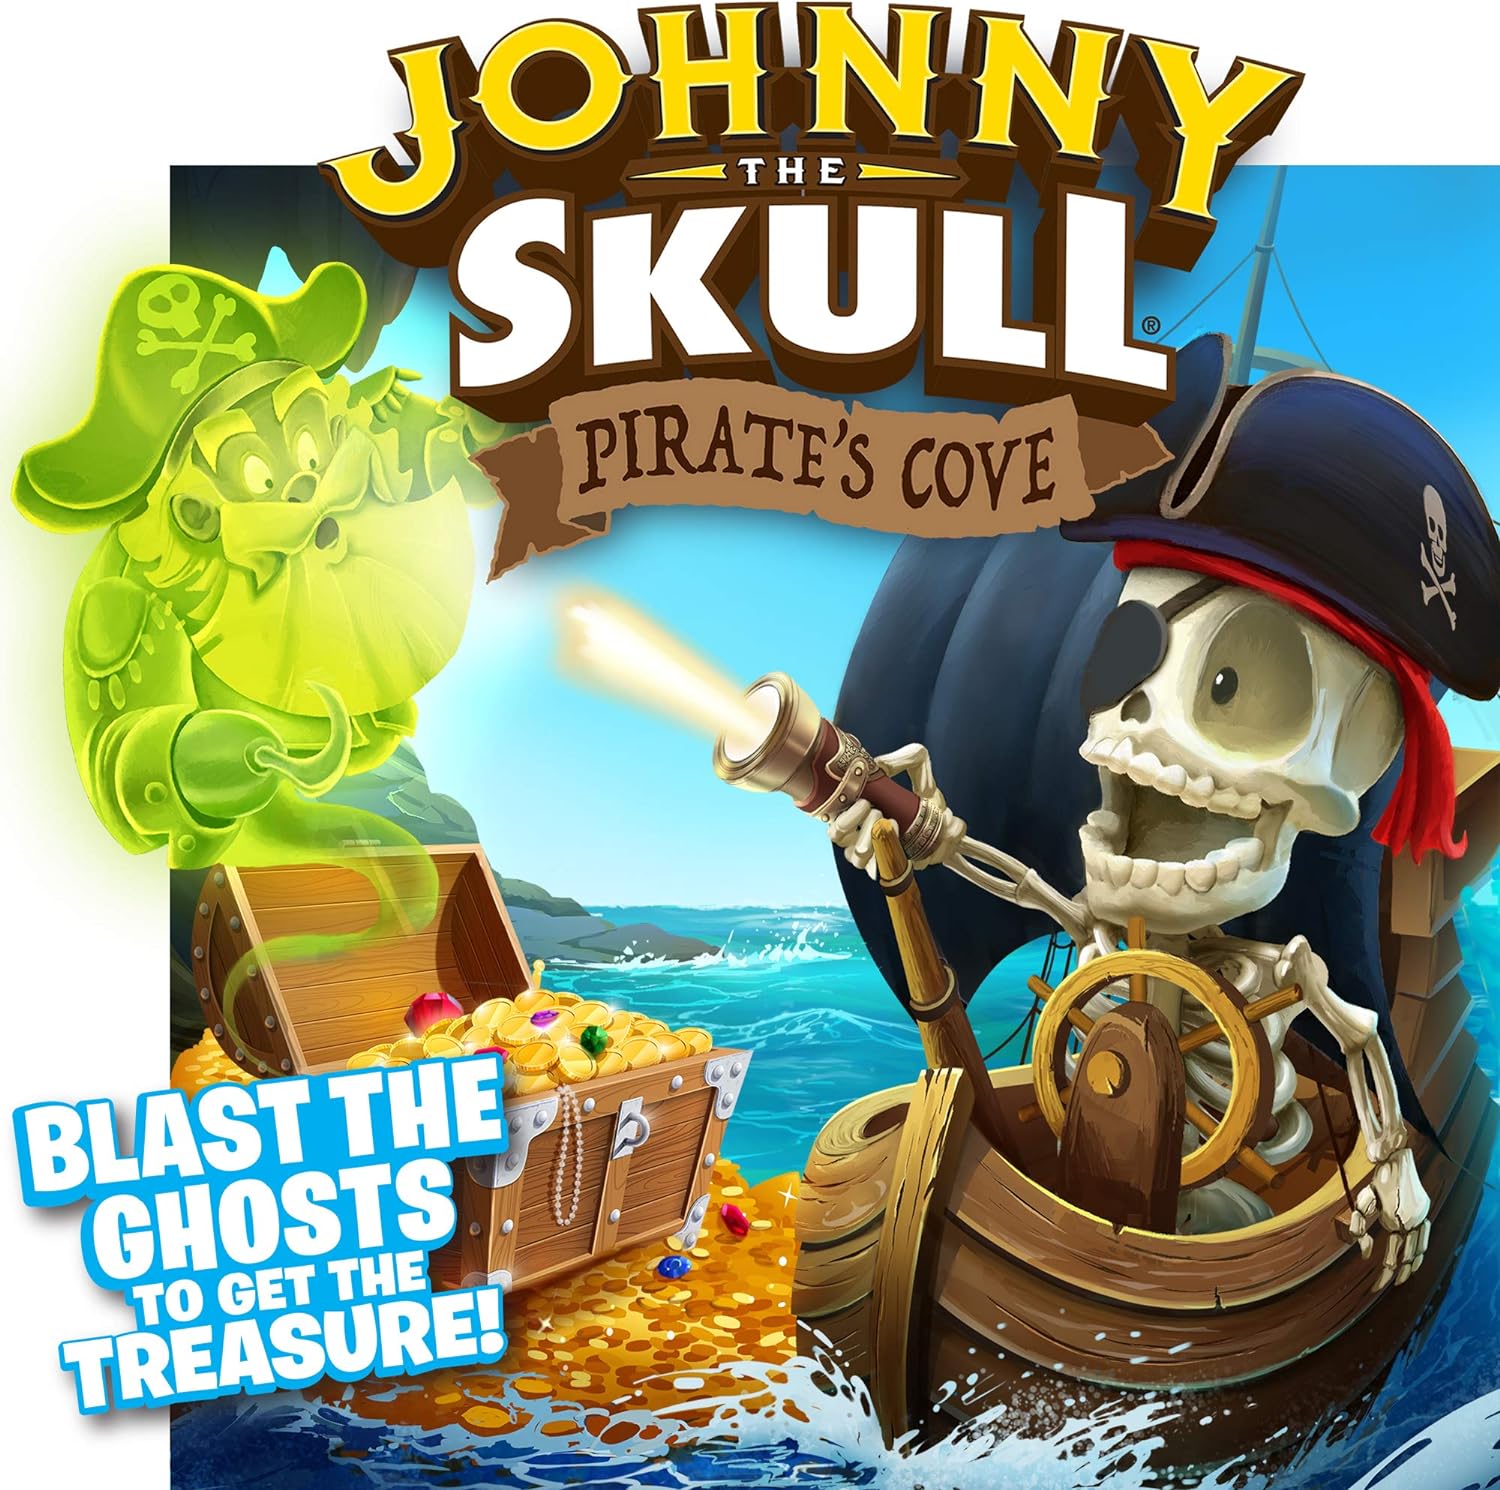 Johnny The Skull - Pirate's Cove: Blast the Ghosts to Get the Treasure! | Fun Action Game For All The Family | 1 or More Players | Ages 4+